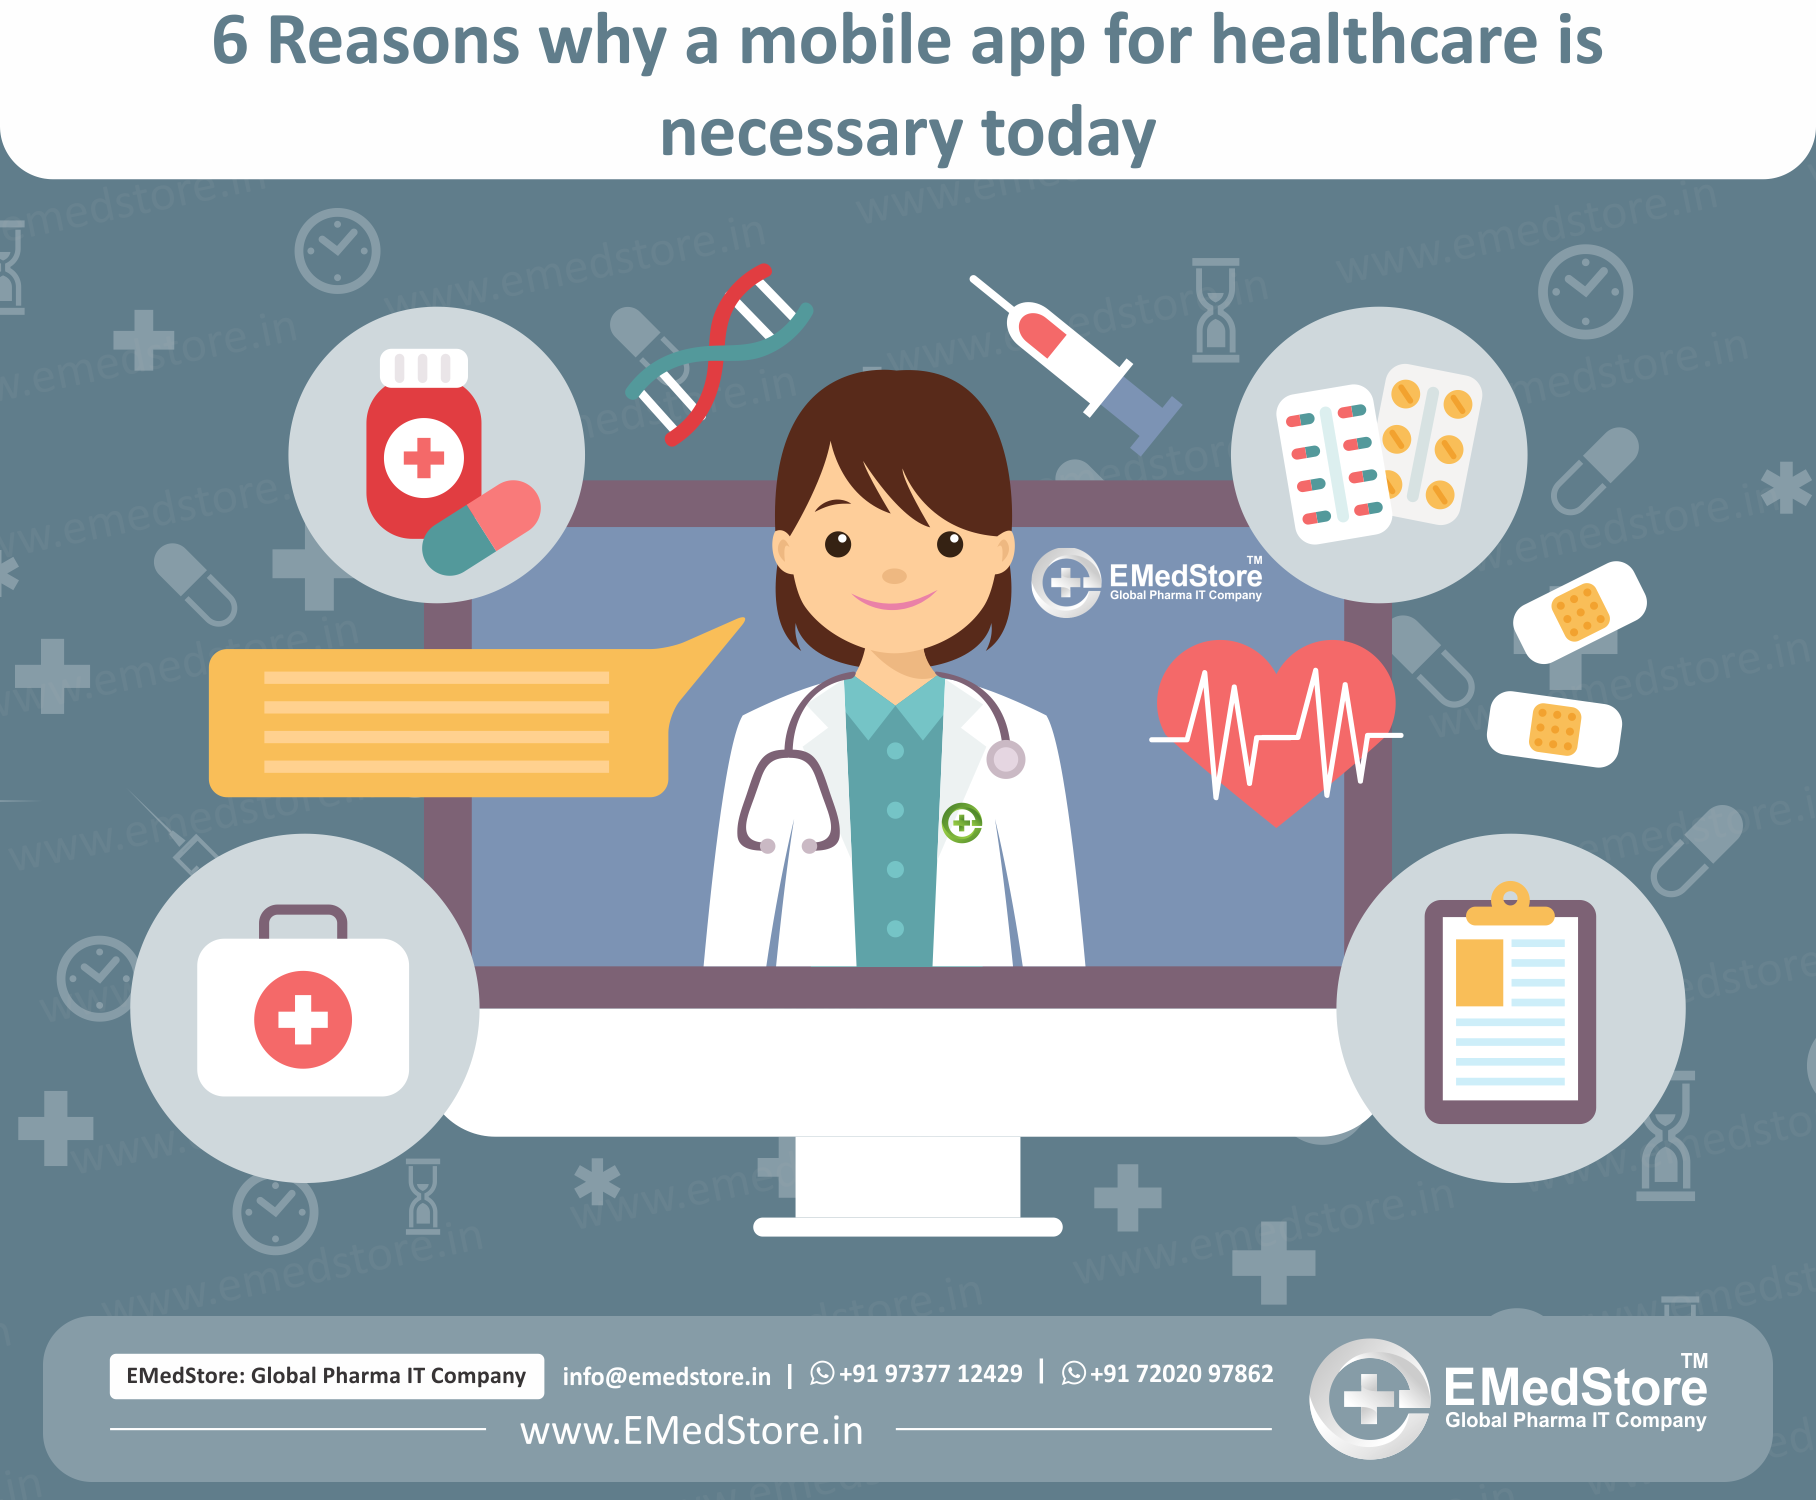 6 Reasons why a mobile app for healthcare is necessary today